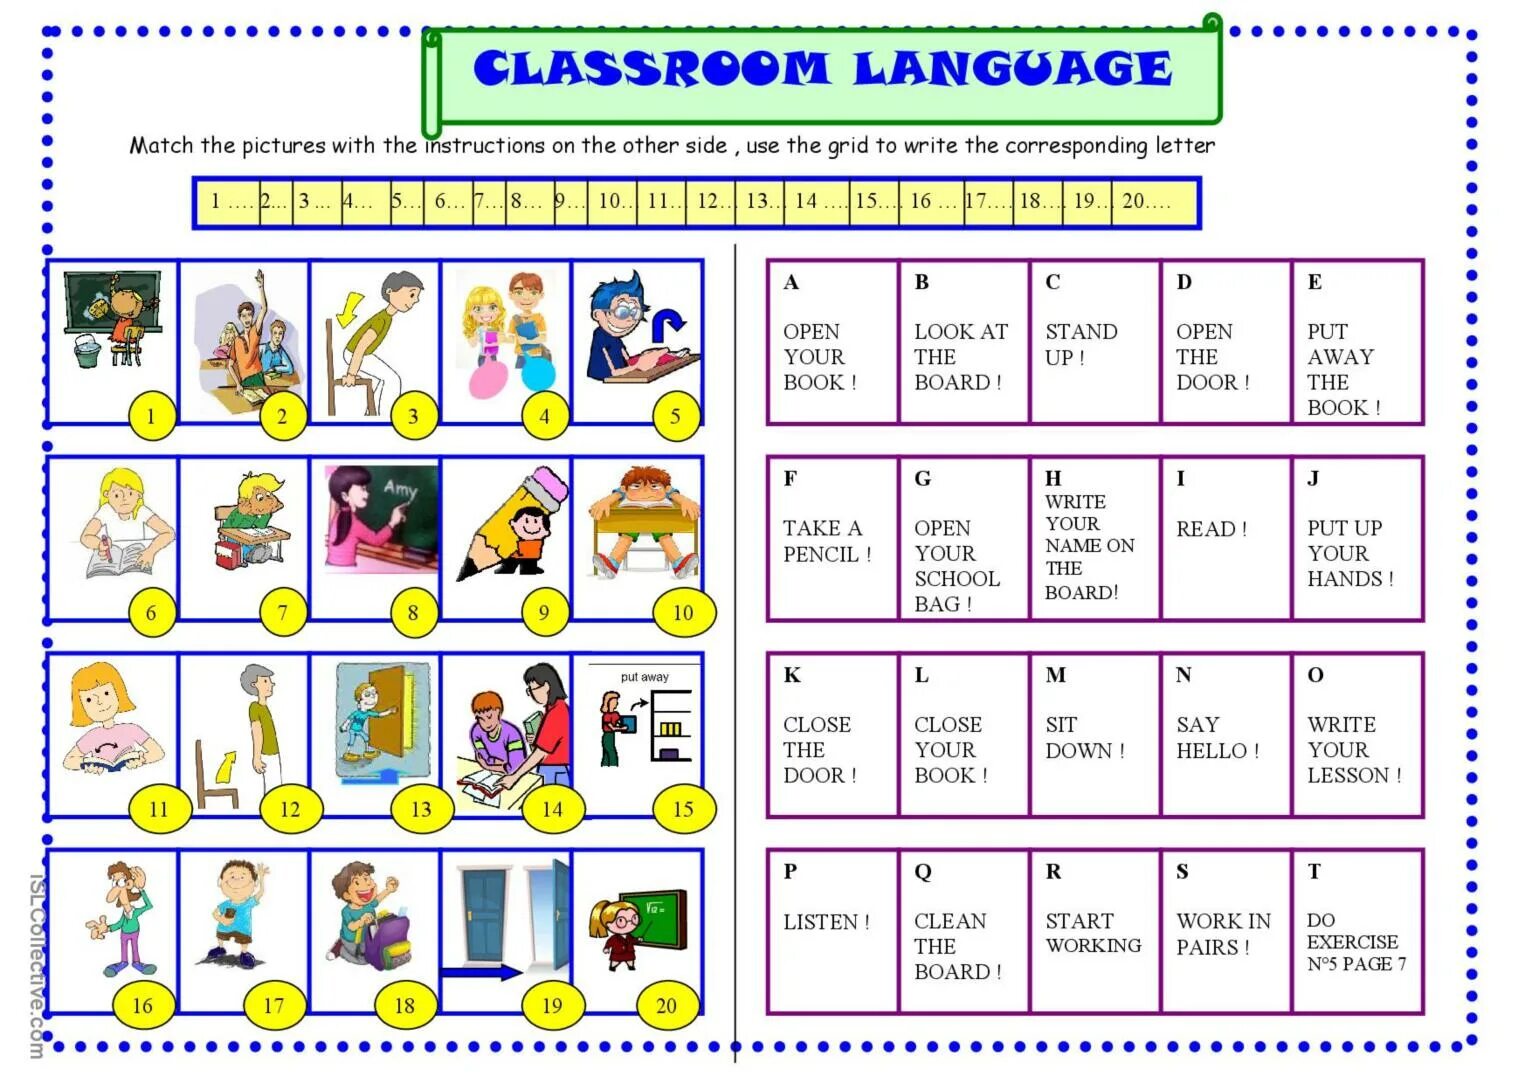 Английский Classroom language. Упражнения на Classroom language. Classroom language на уроке английского. Commands in English for Kids. Work in pairs write